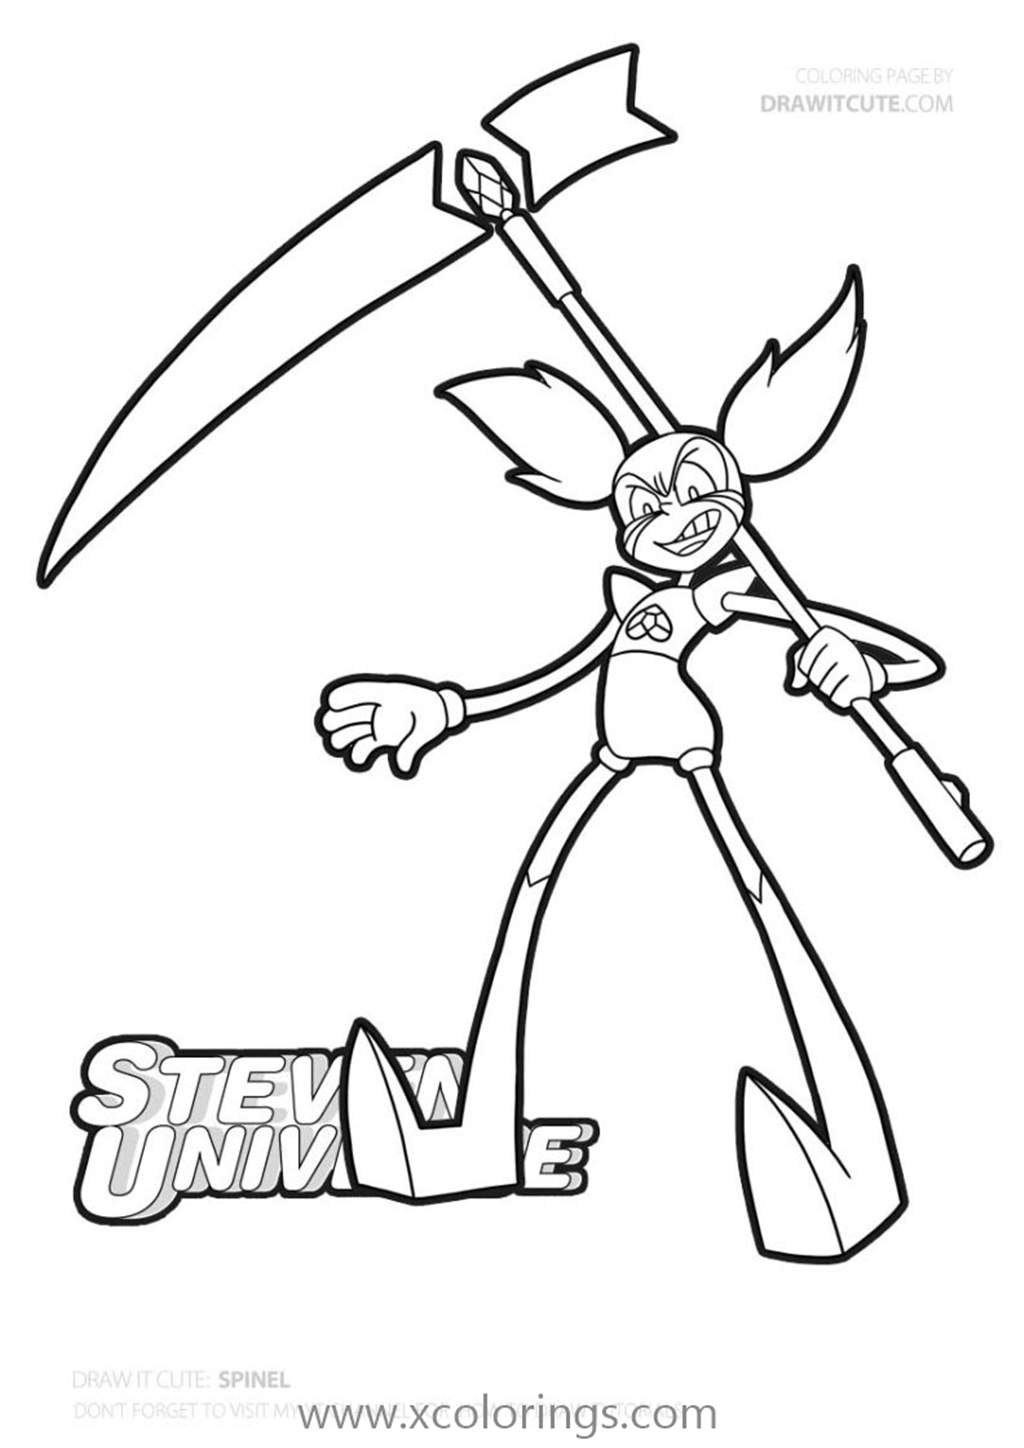 Free Steven Universe Coloring Pages Spinel printable